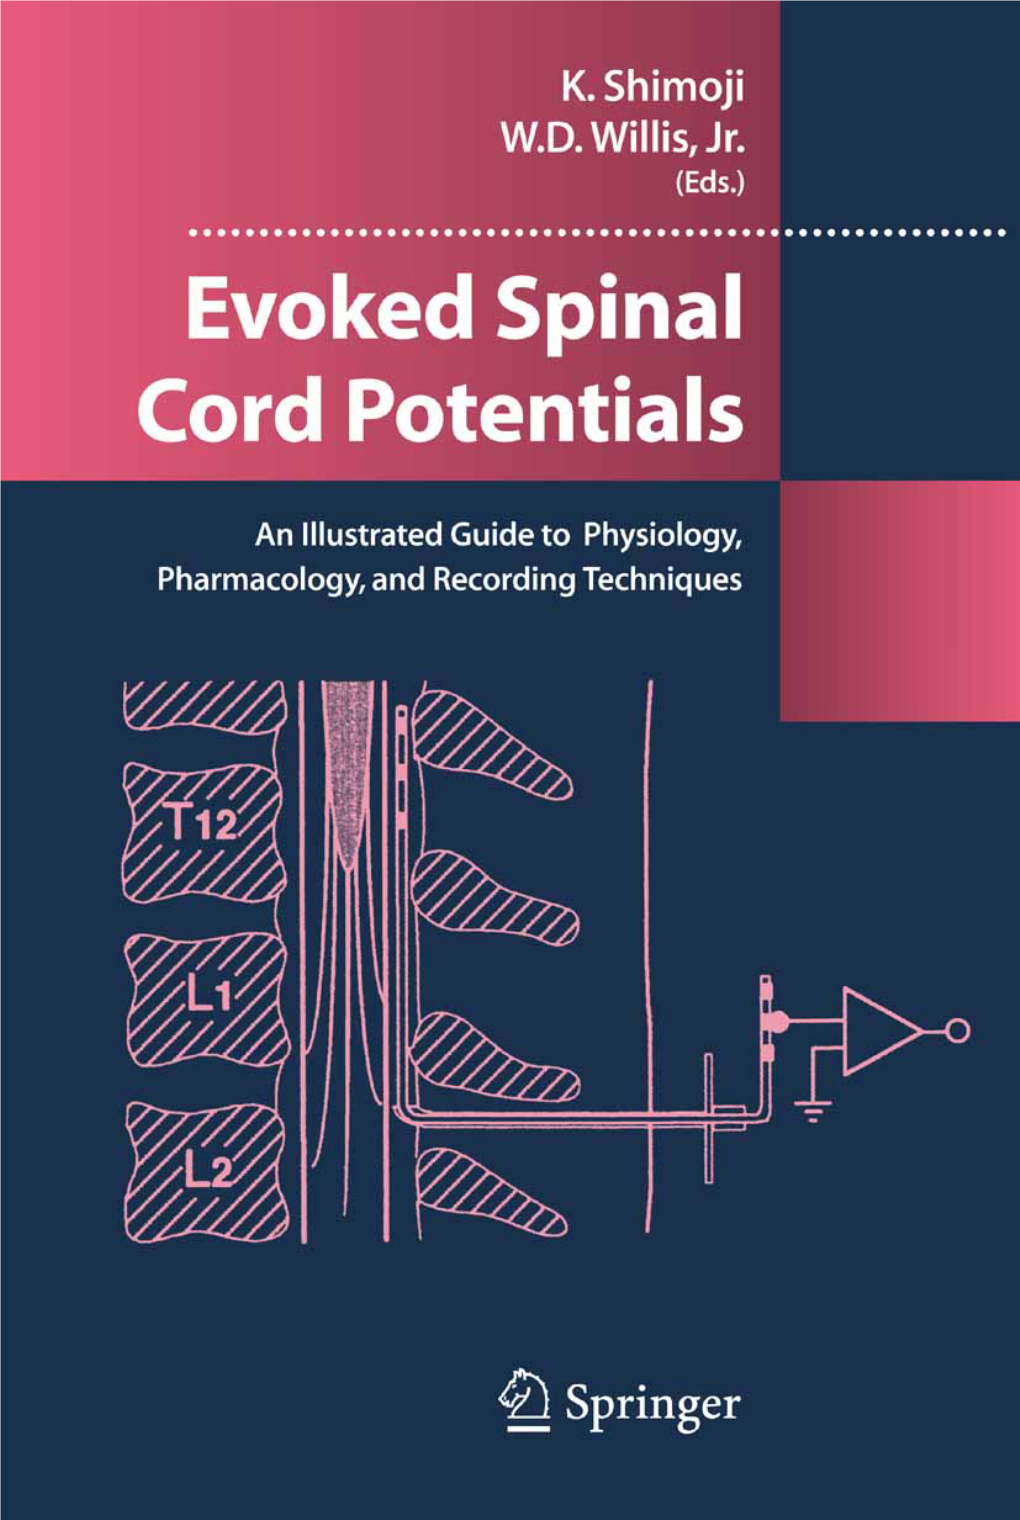 Evoked Spinal Cord Potentials.Pdf